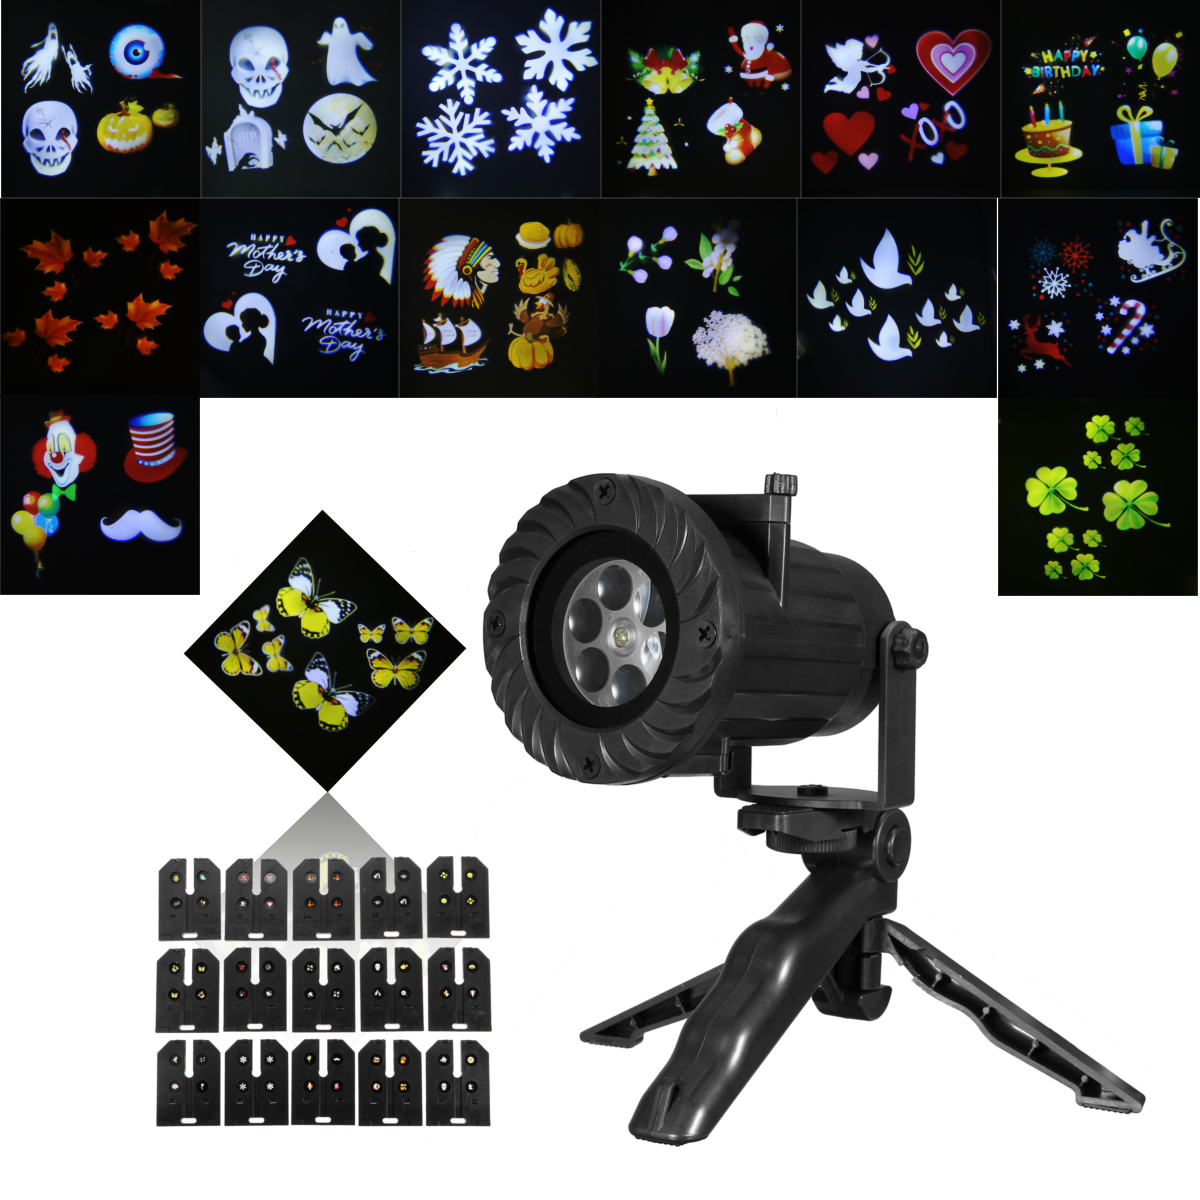 15-Patterns-LED-Projector-Stage-Light-Party-KTV-DJ-Disco-with-Remote-1231046-3